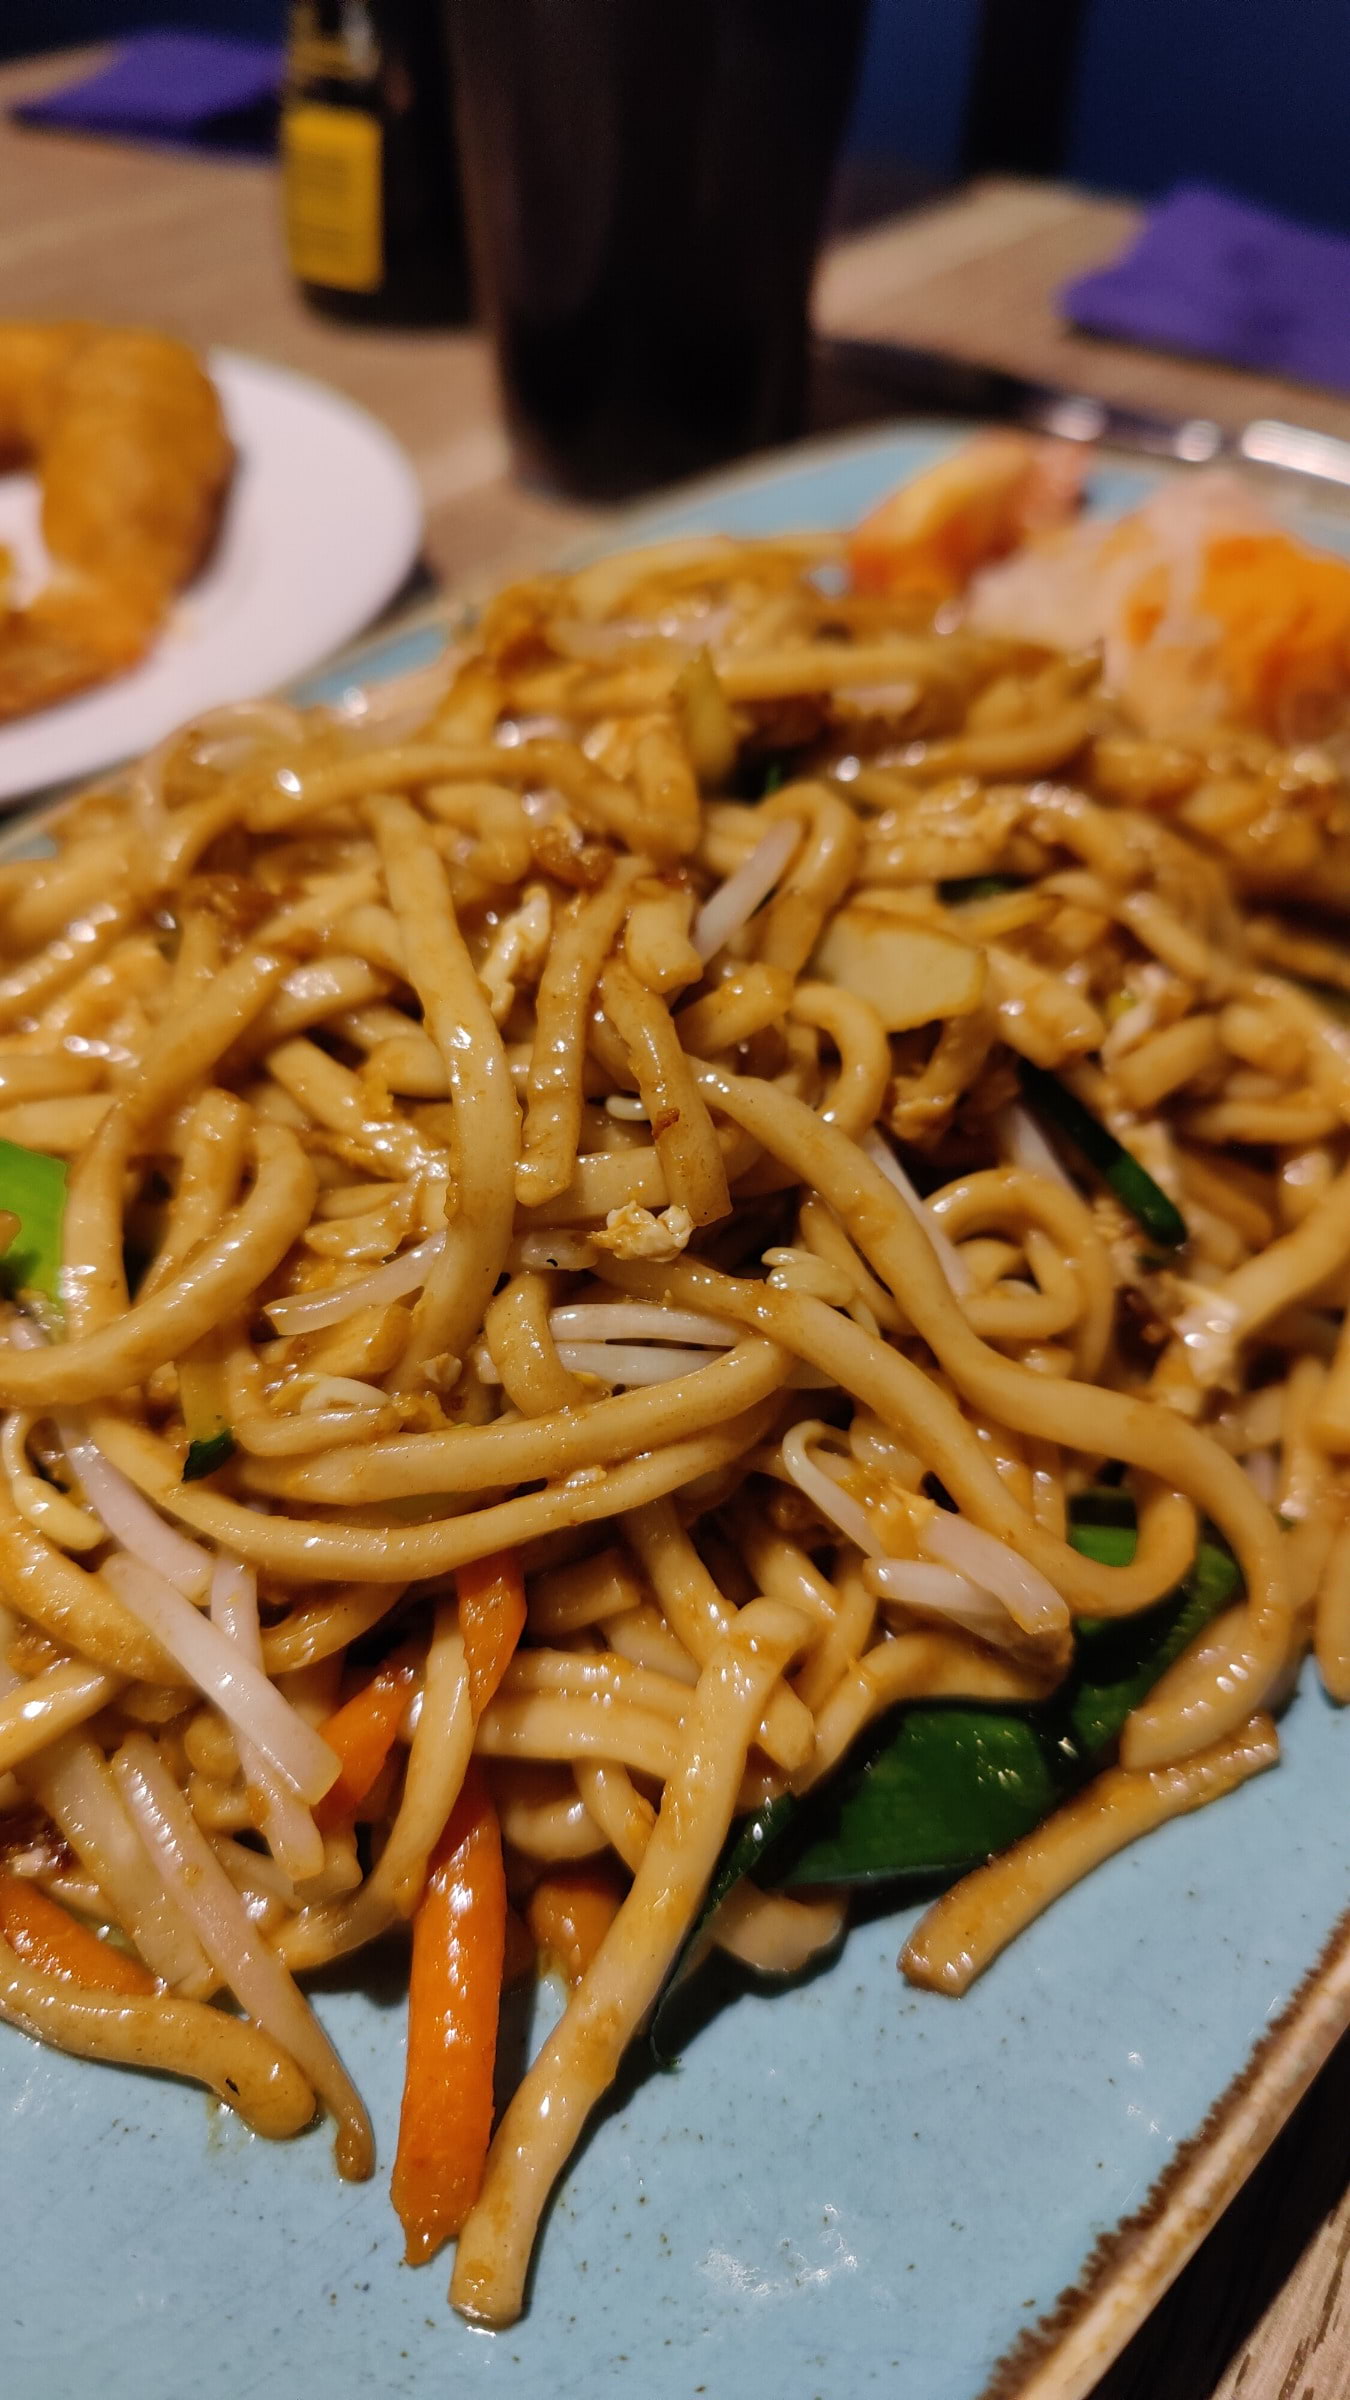 Umi Noodles – Photo from Umi & Chao by Shahzad A. (25/06/2022)